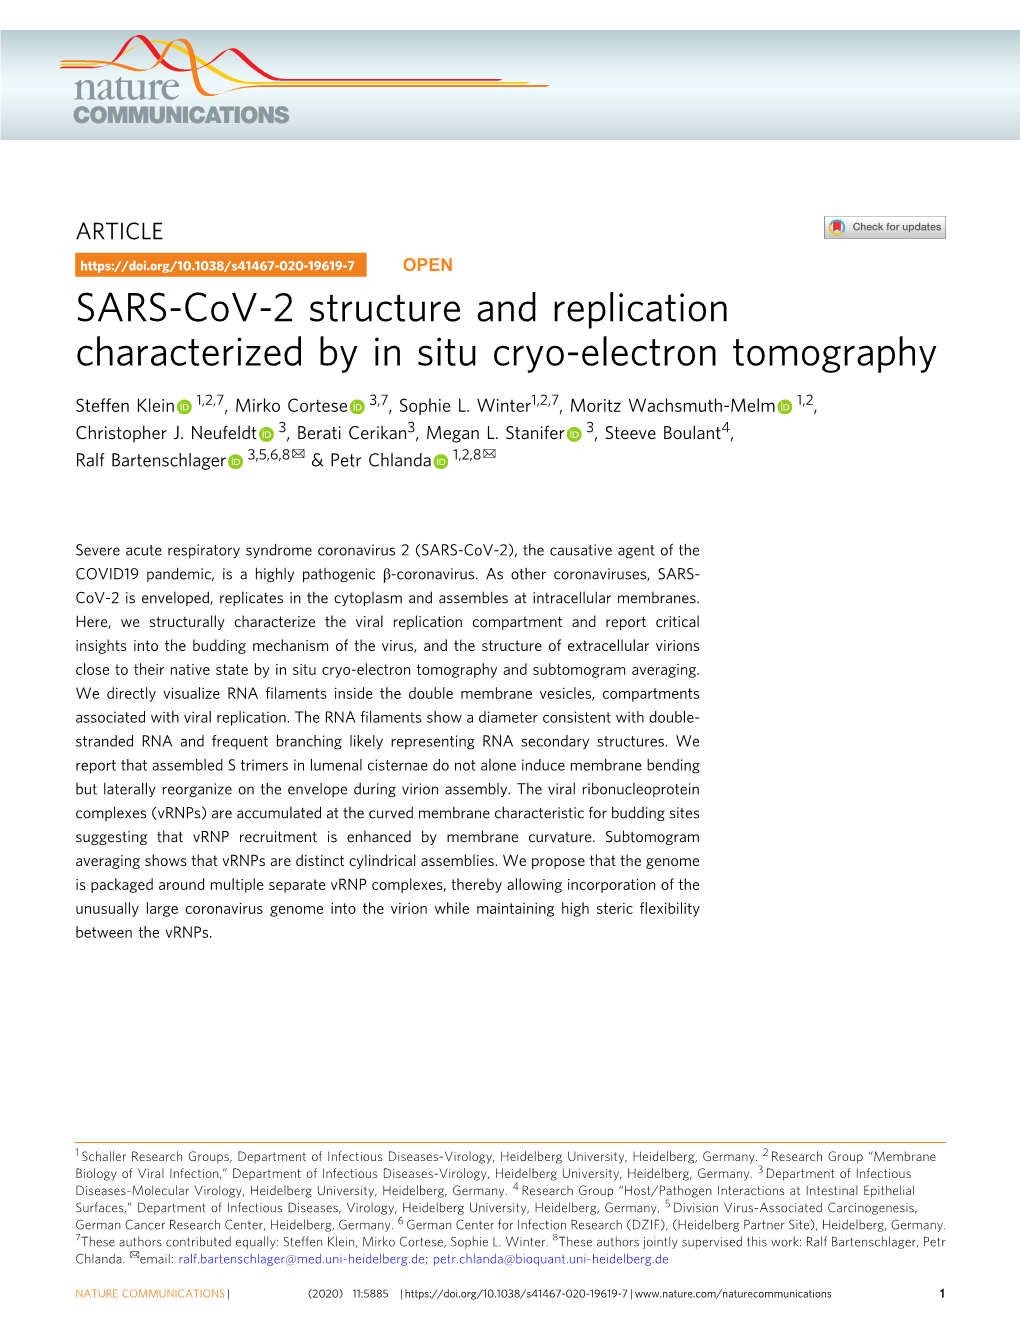 SARS-Cov-2 Structure and Replication Characterized by in Situ Cryo-Electron Tomography